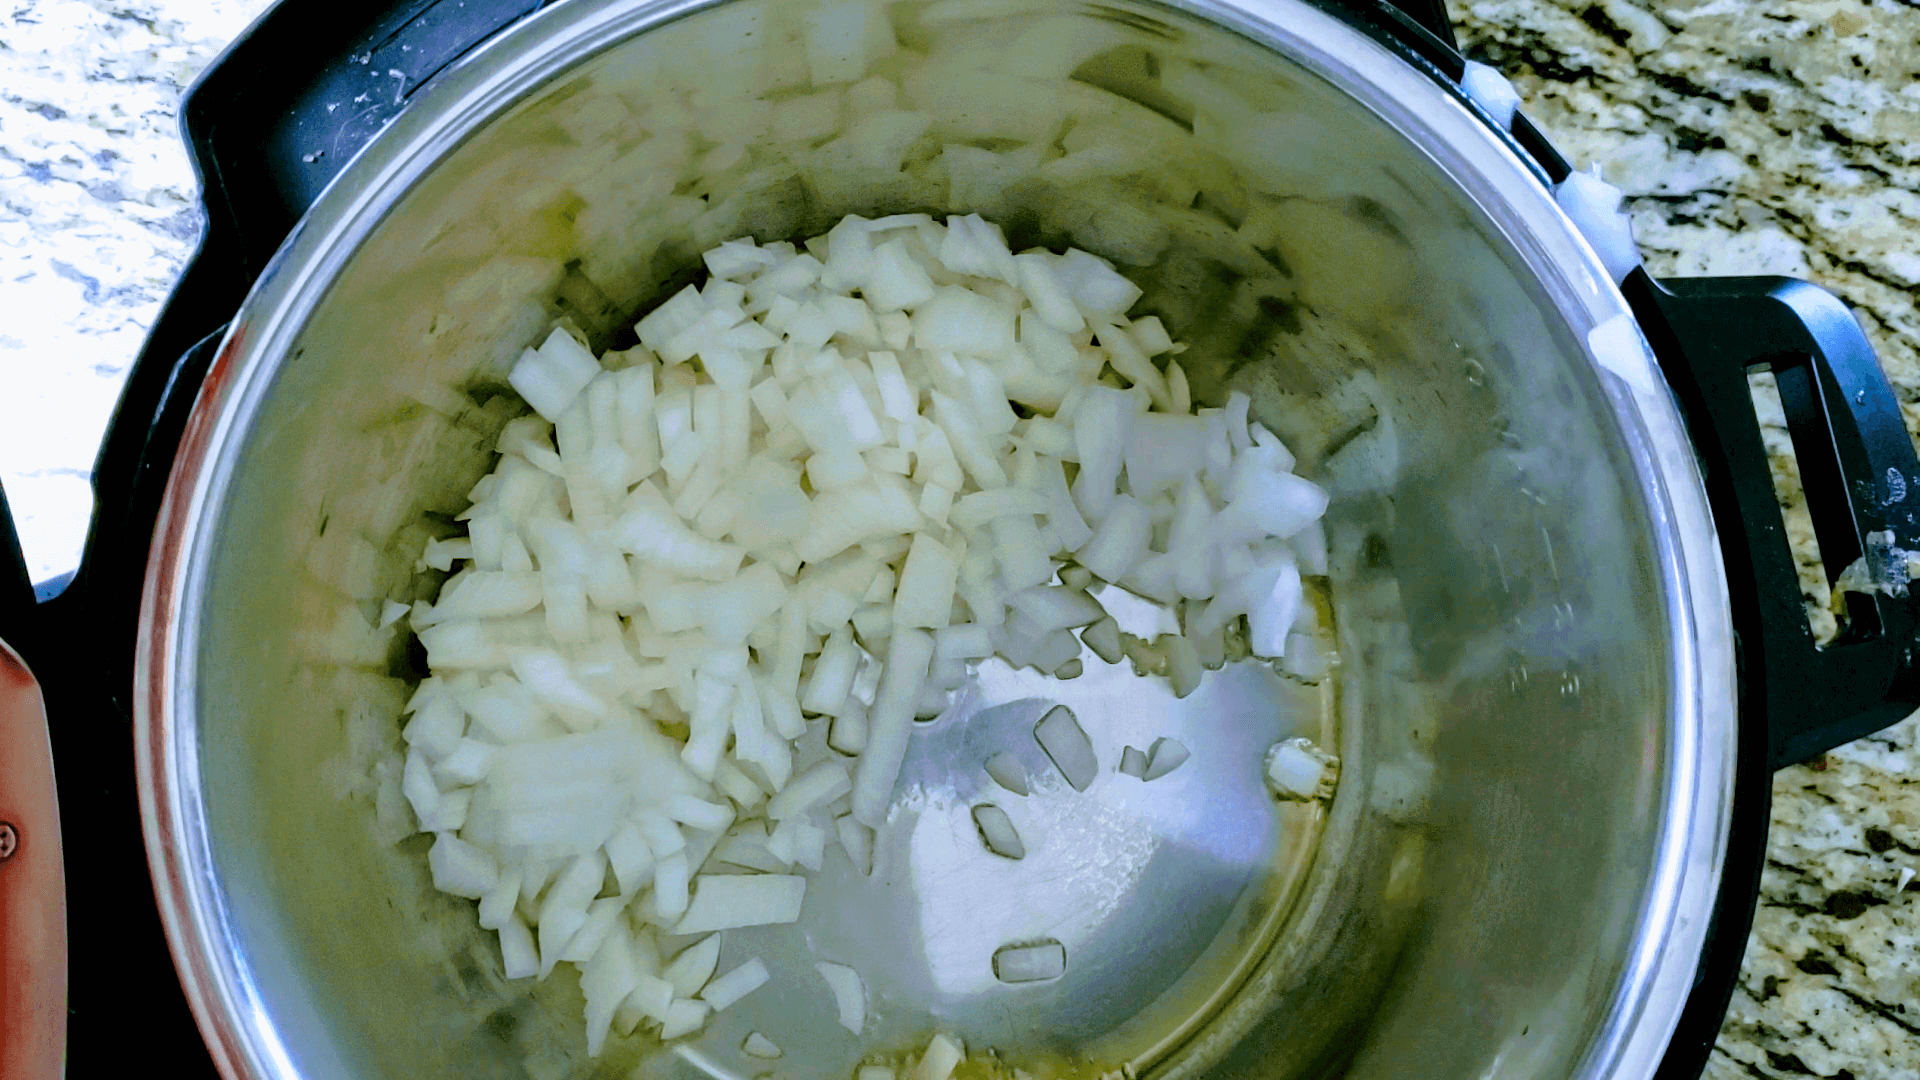 Browning onions